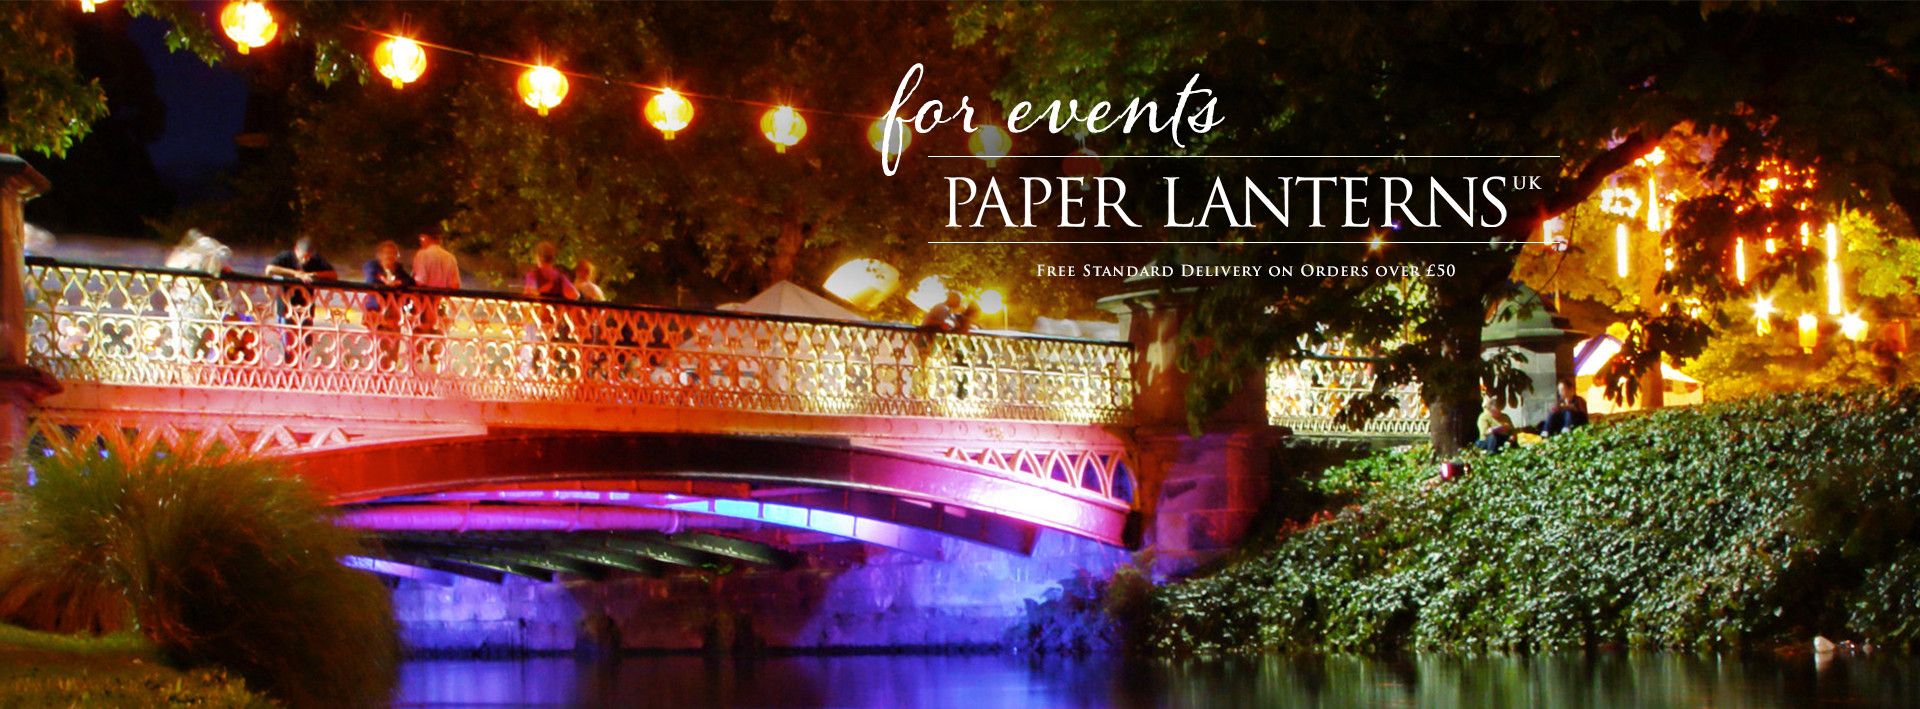 Paper Lanterns for events and weddings - Paper Lanterns UK